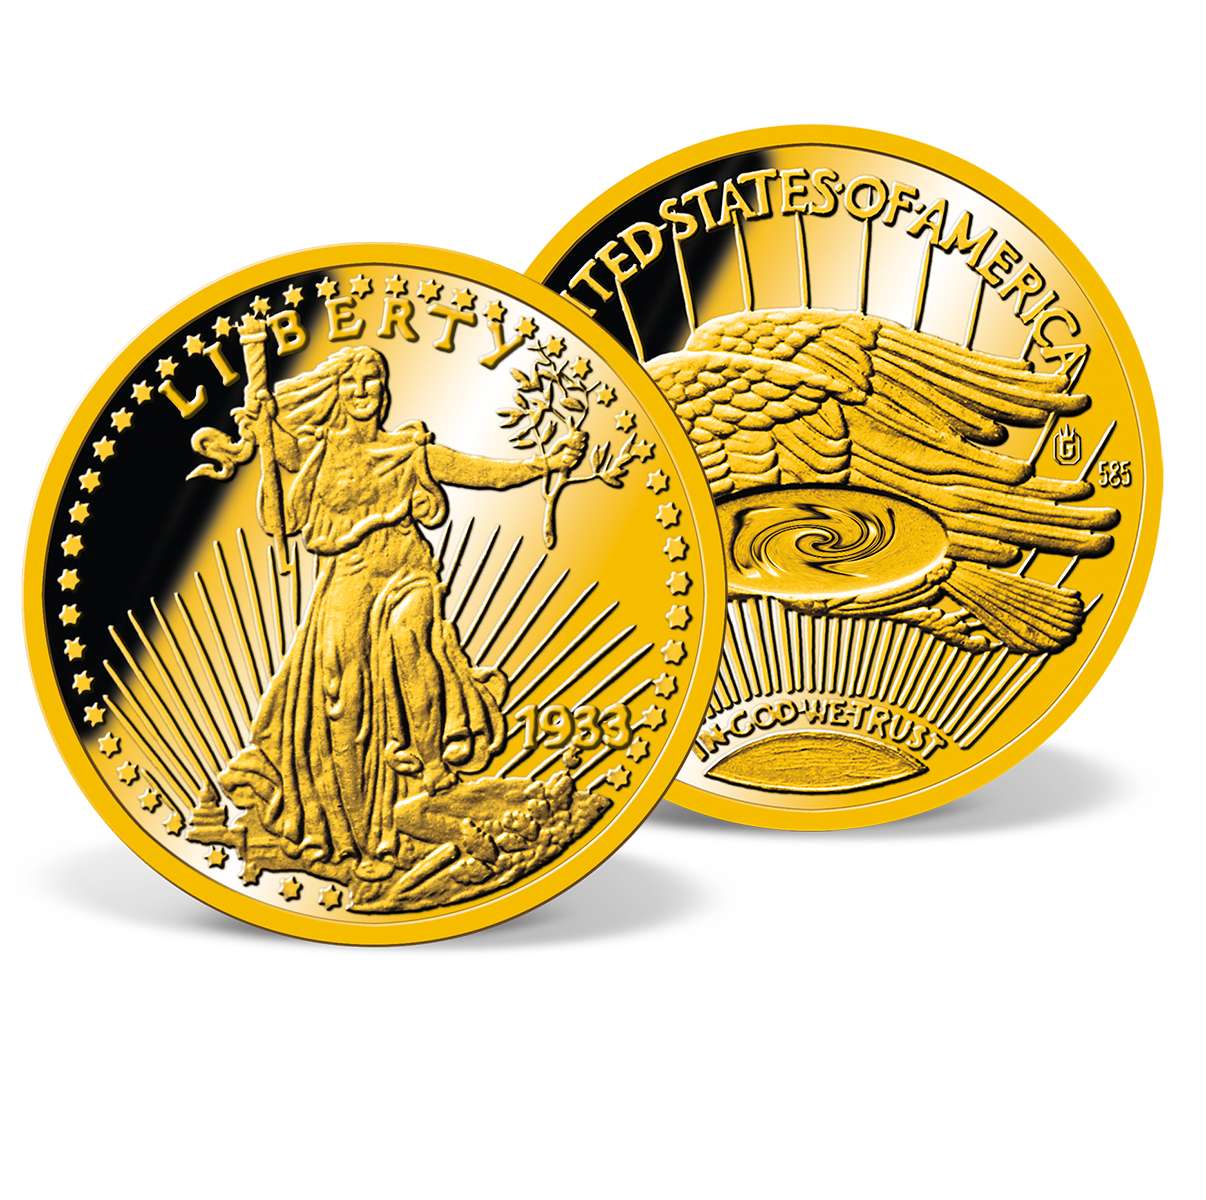 Replica Gold Coins For Sale - U.S. Currency | American Mint